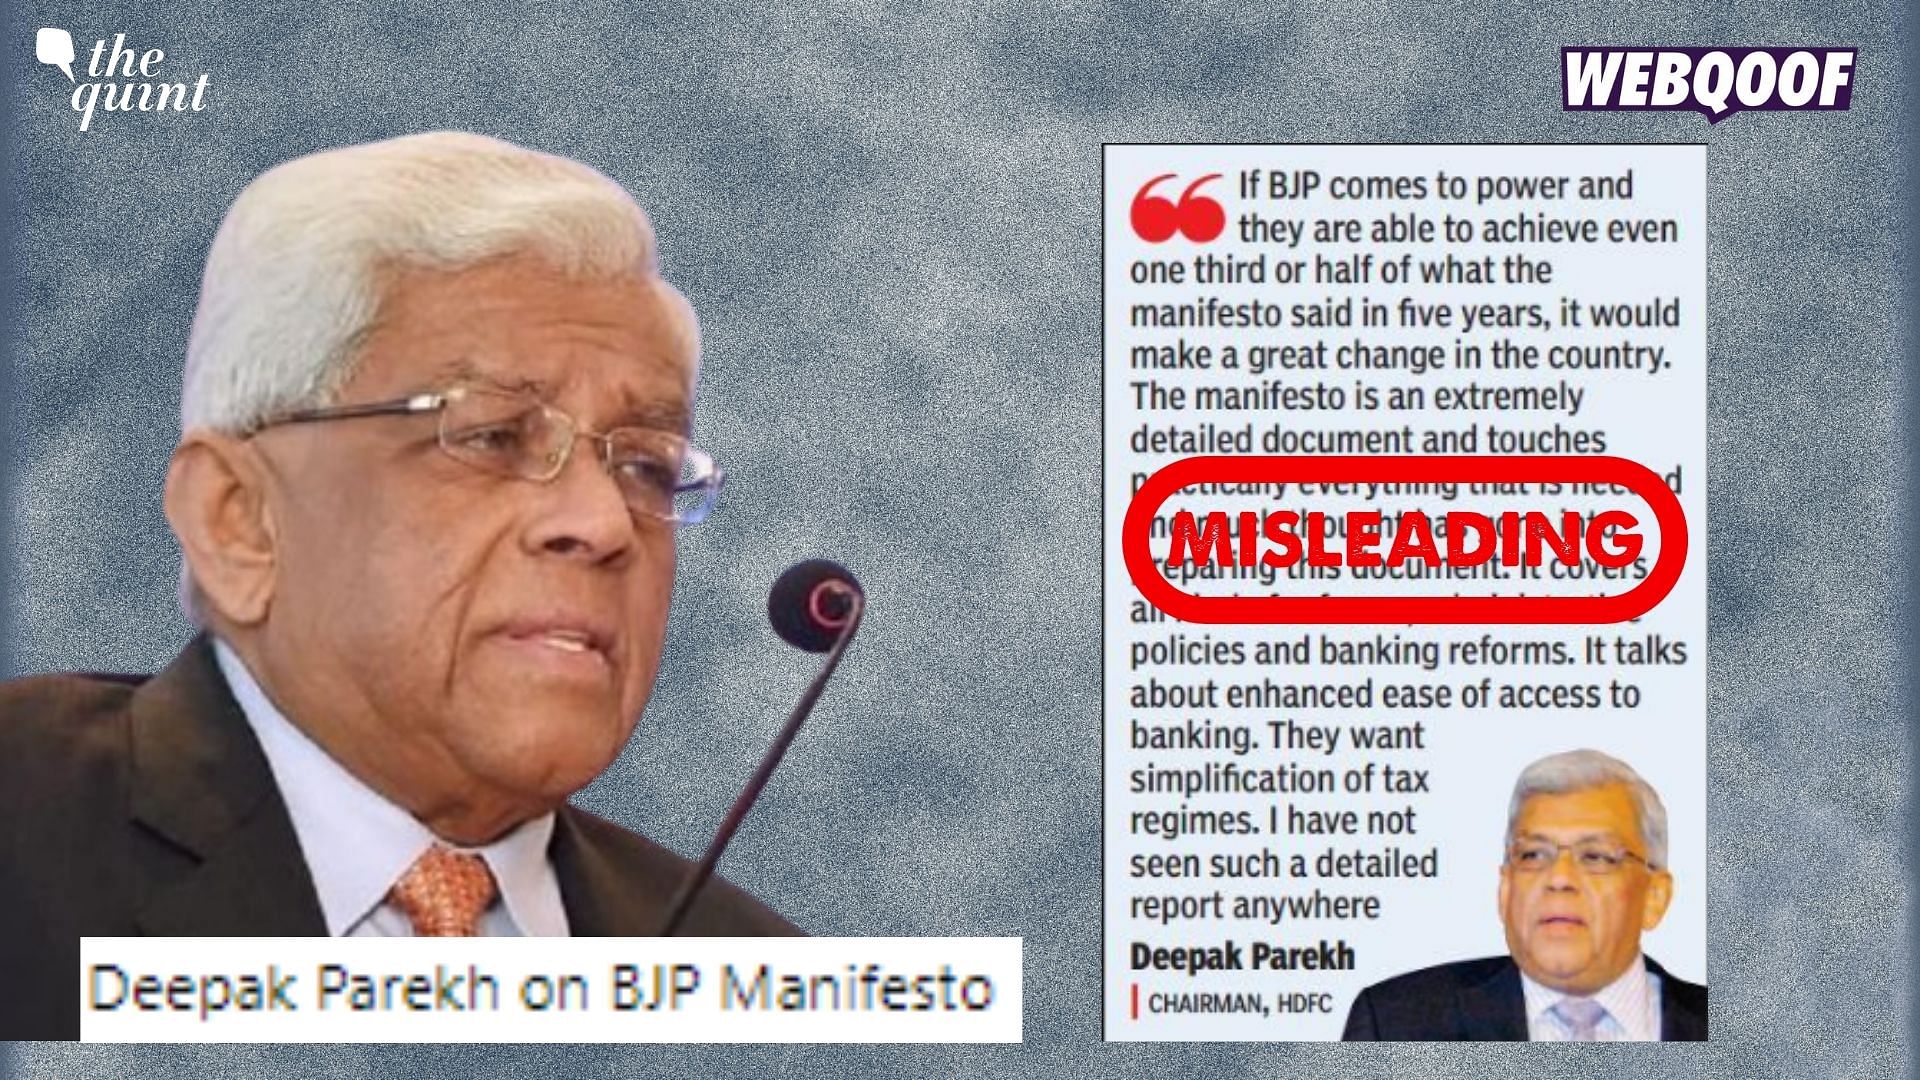 Old Remarks by HDFC's Deepak Parekh on BJP Manifesto Shared As Recent